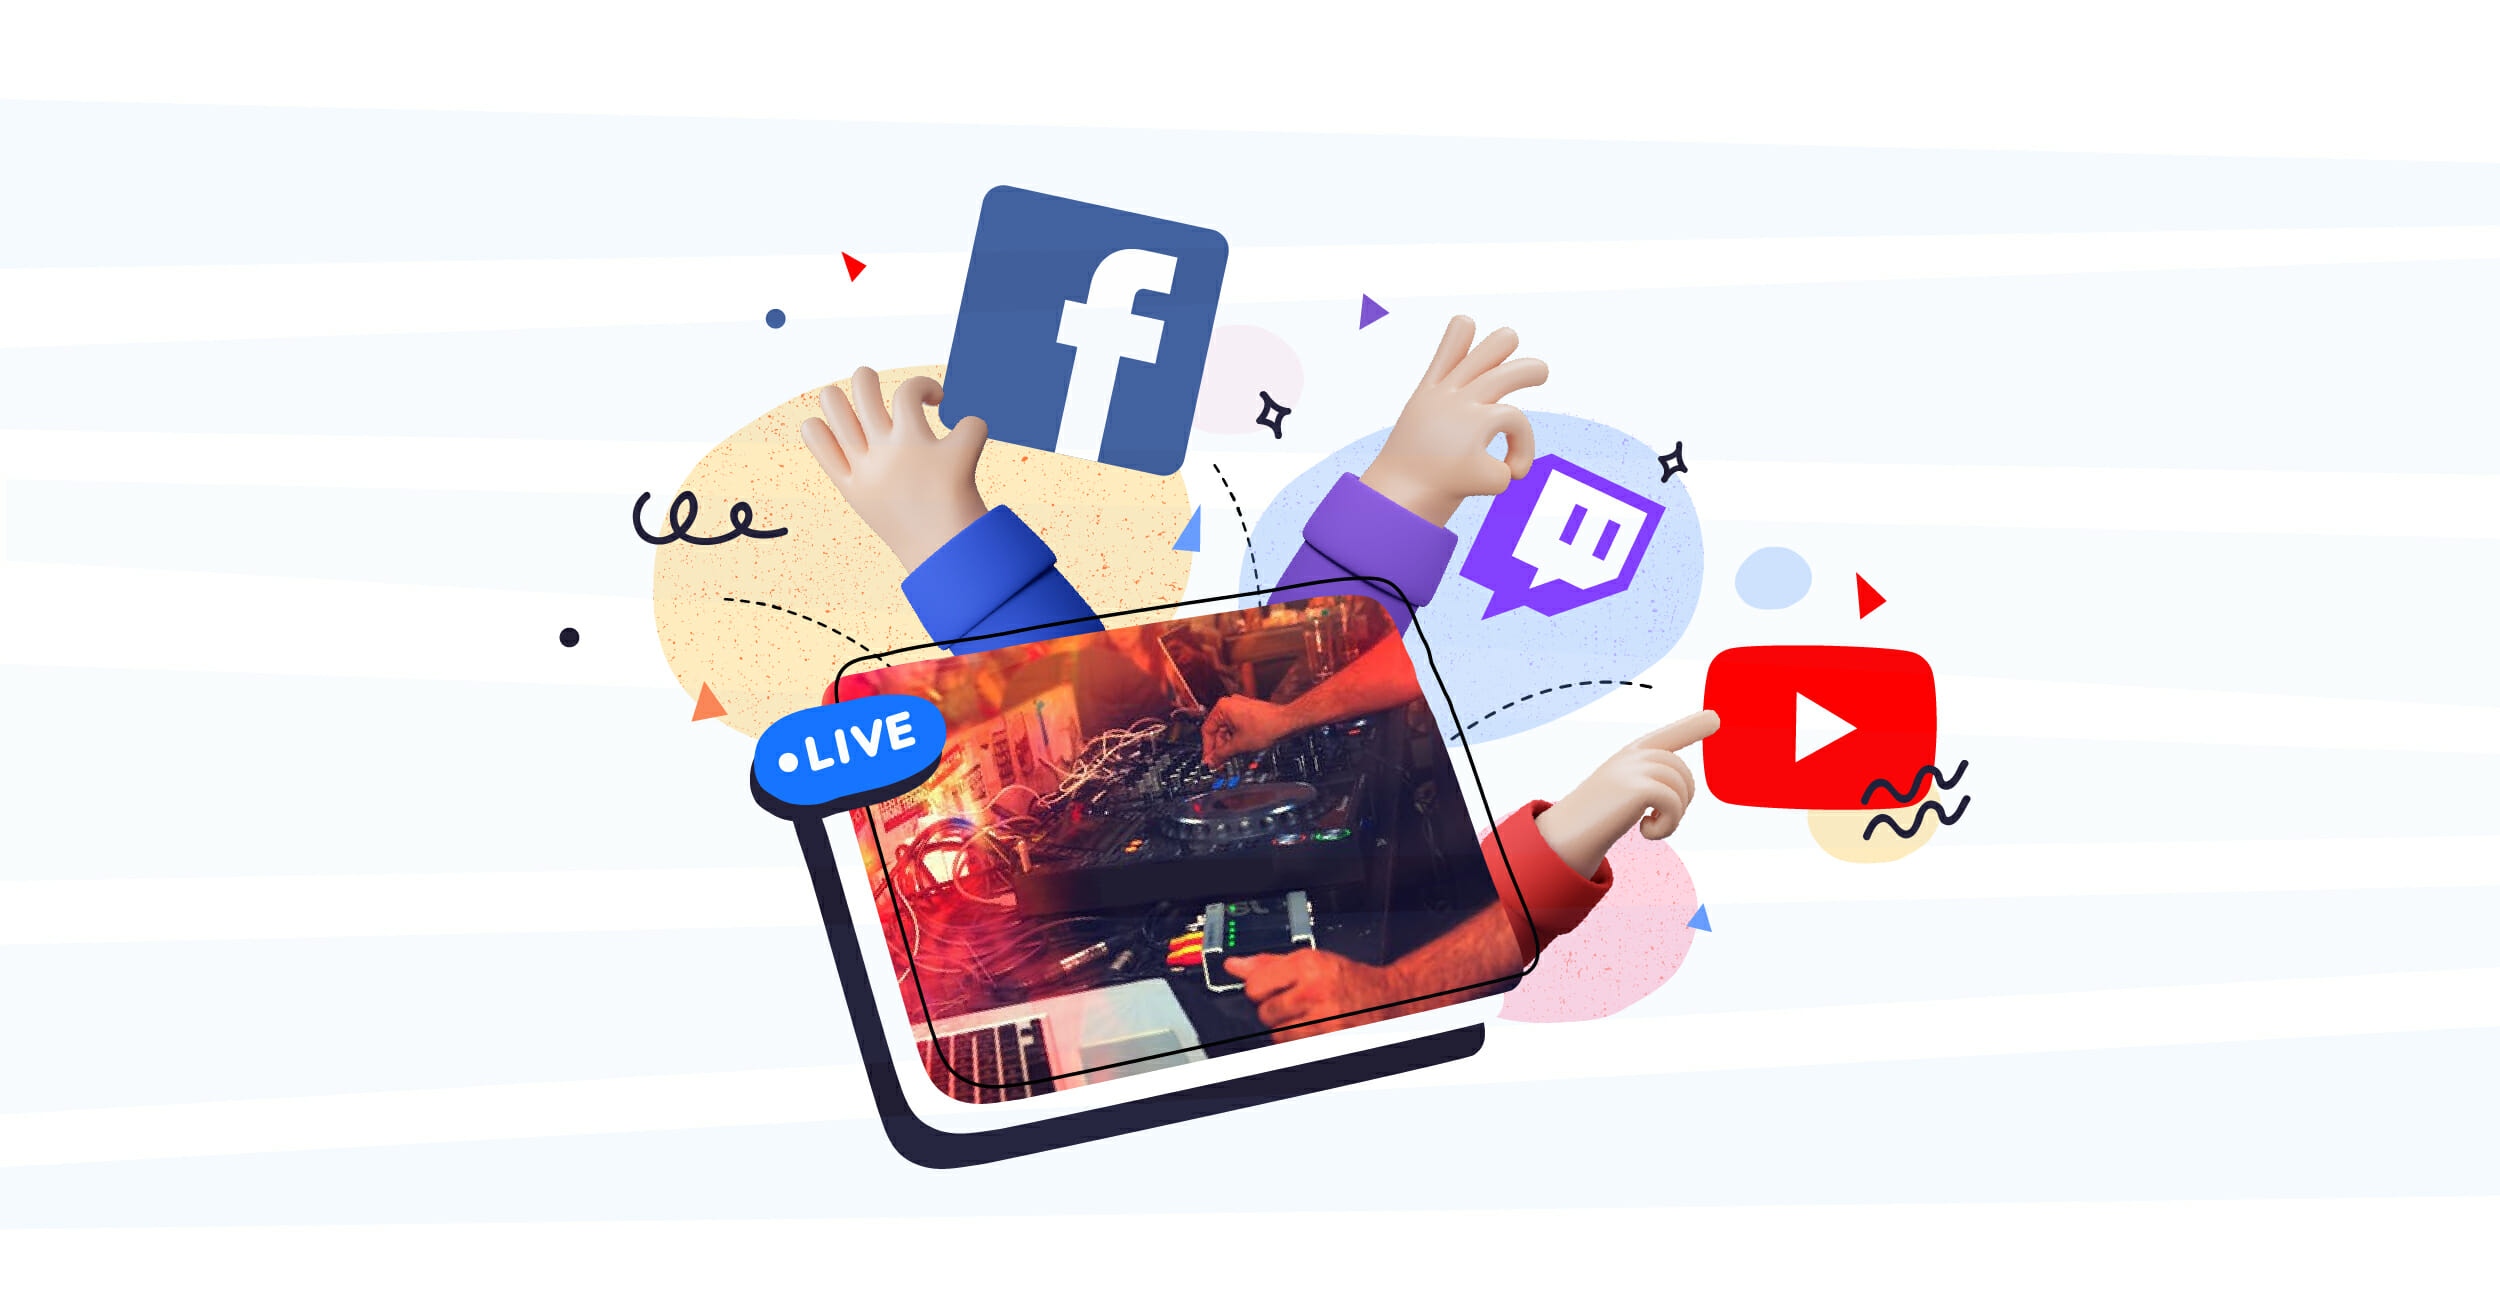 How to Multistream to Facebook, YouTube, and Twitch at the Same Time